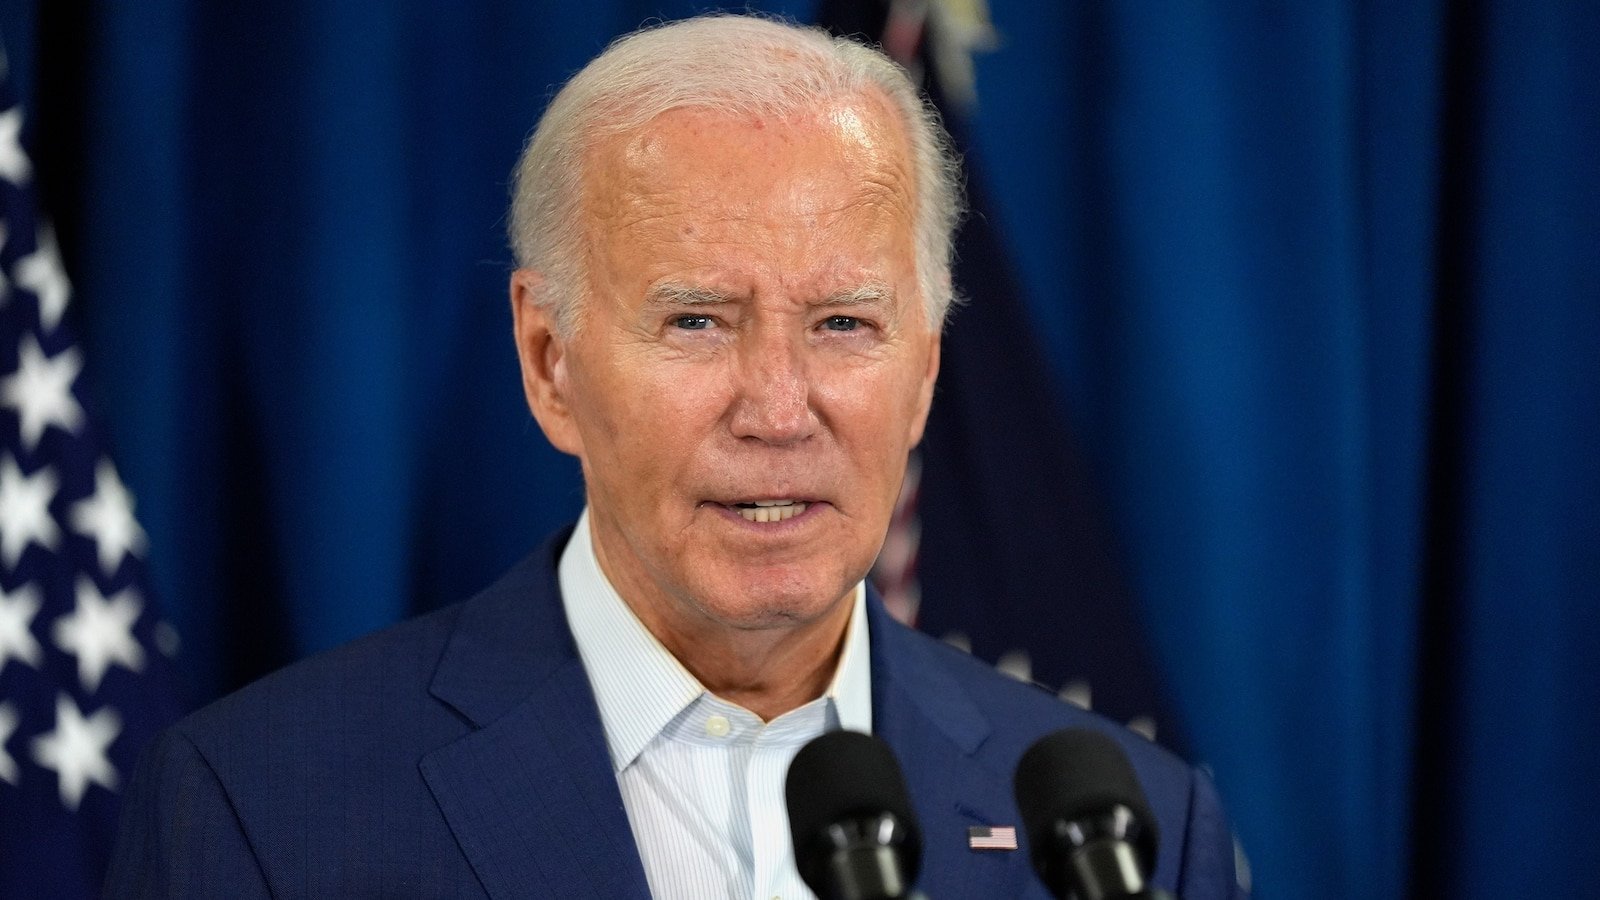 After Trump assassination attempt, Biden campaign pauses ads, events, attacks